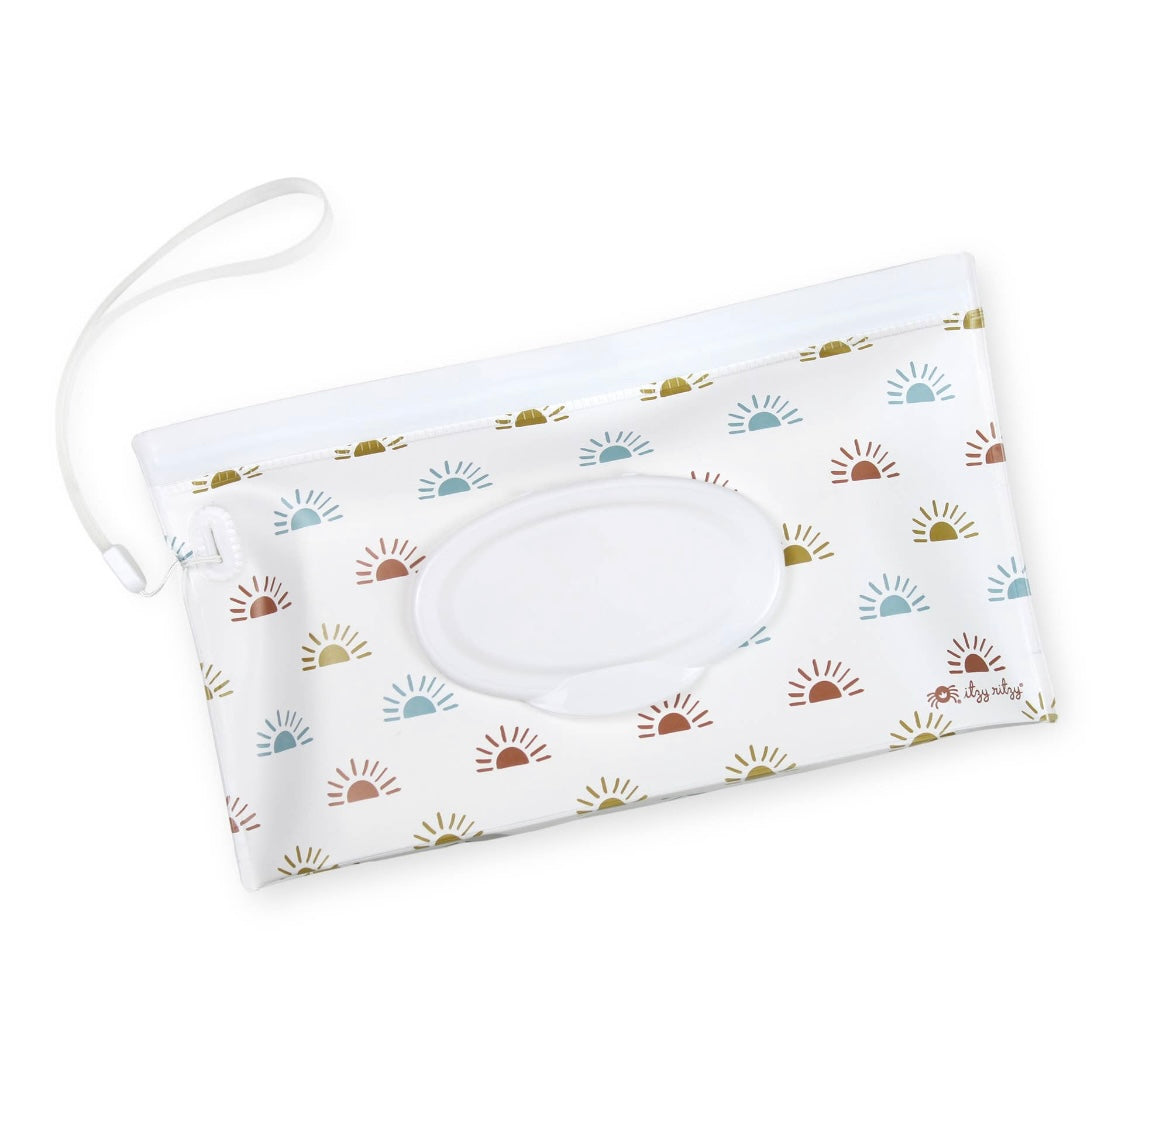 Itzy Ritzy: Take and Travel Reusable Wipes Pouch